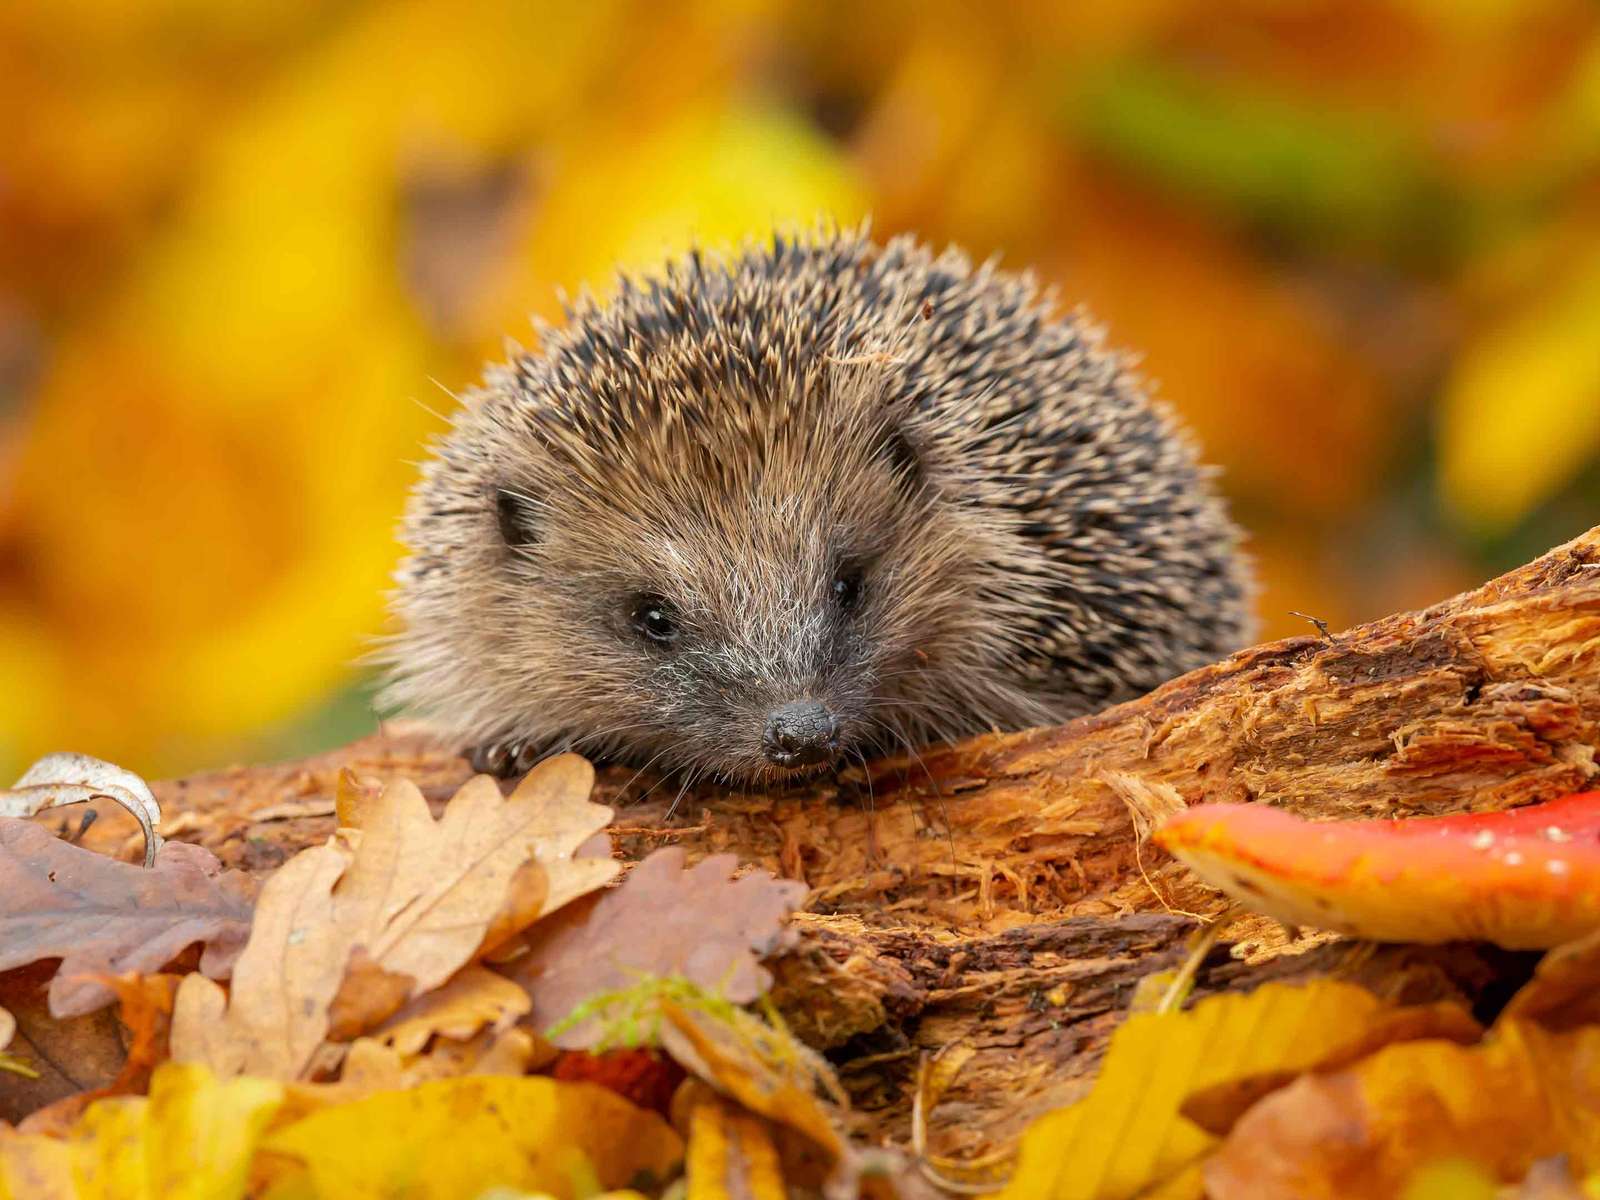 The Hedgehog puzzle online from photo